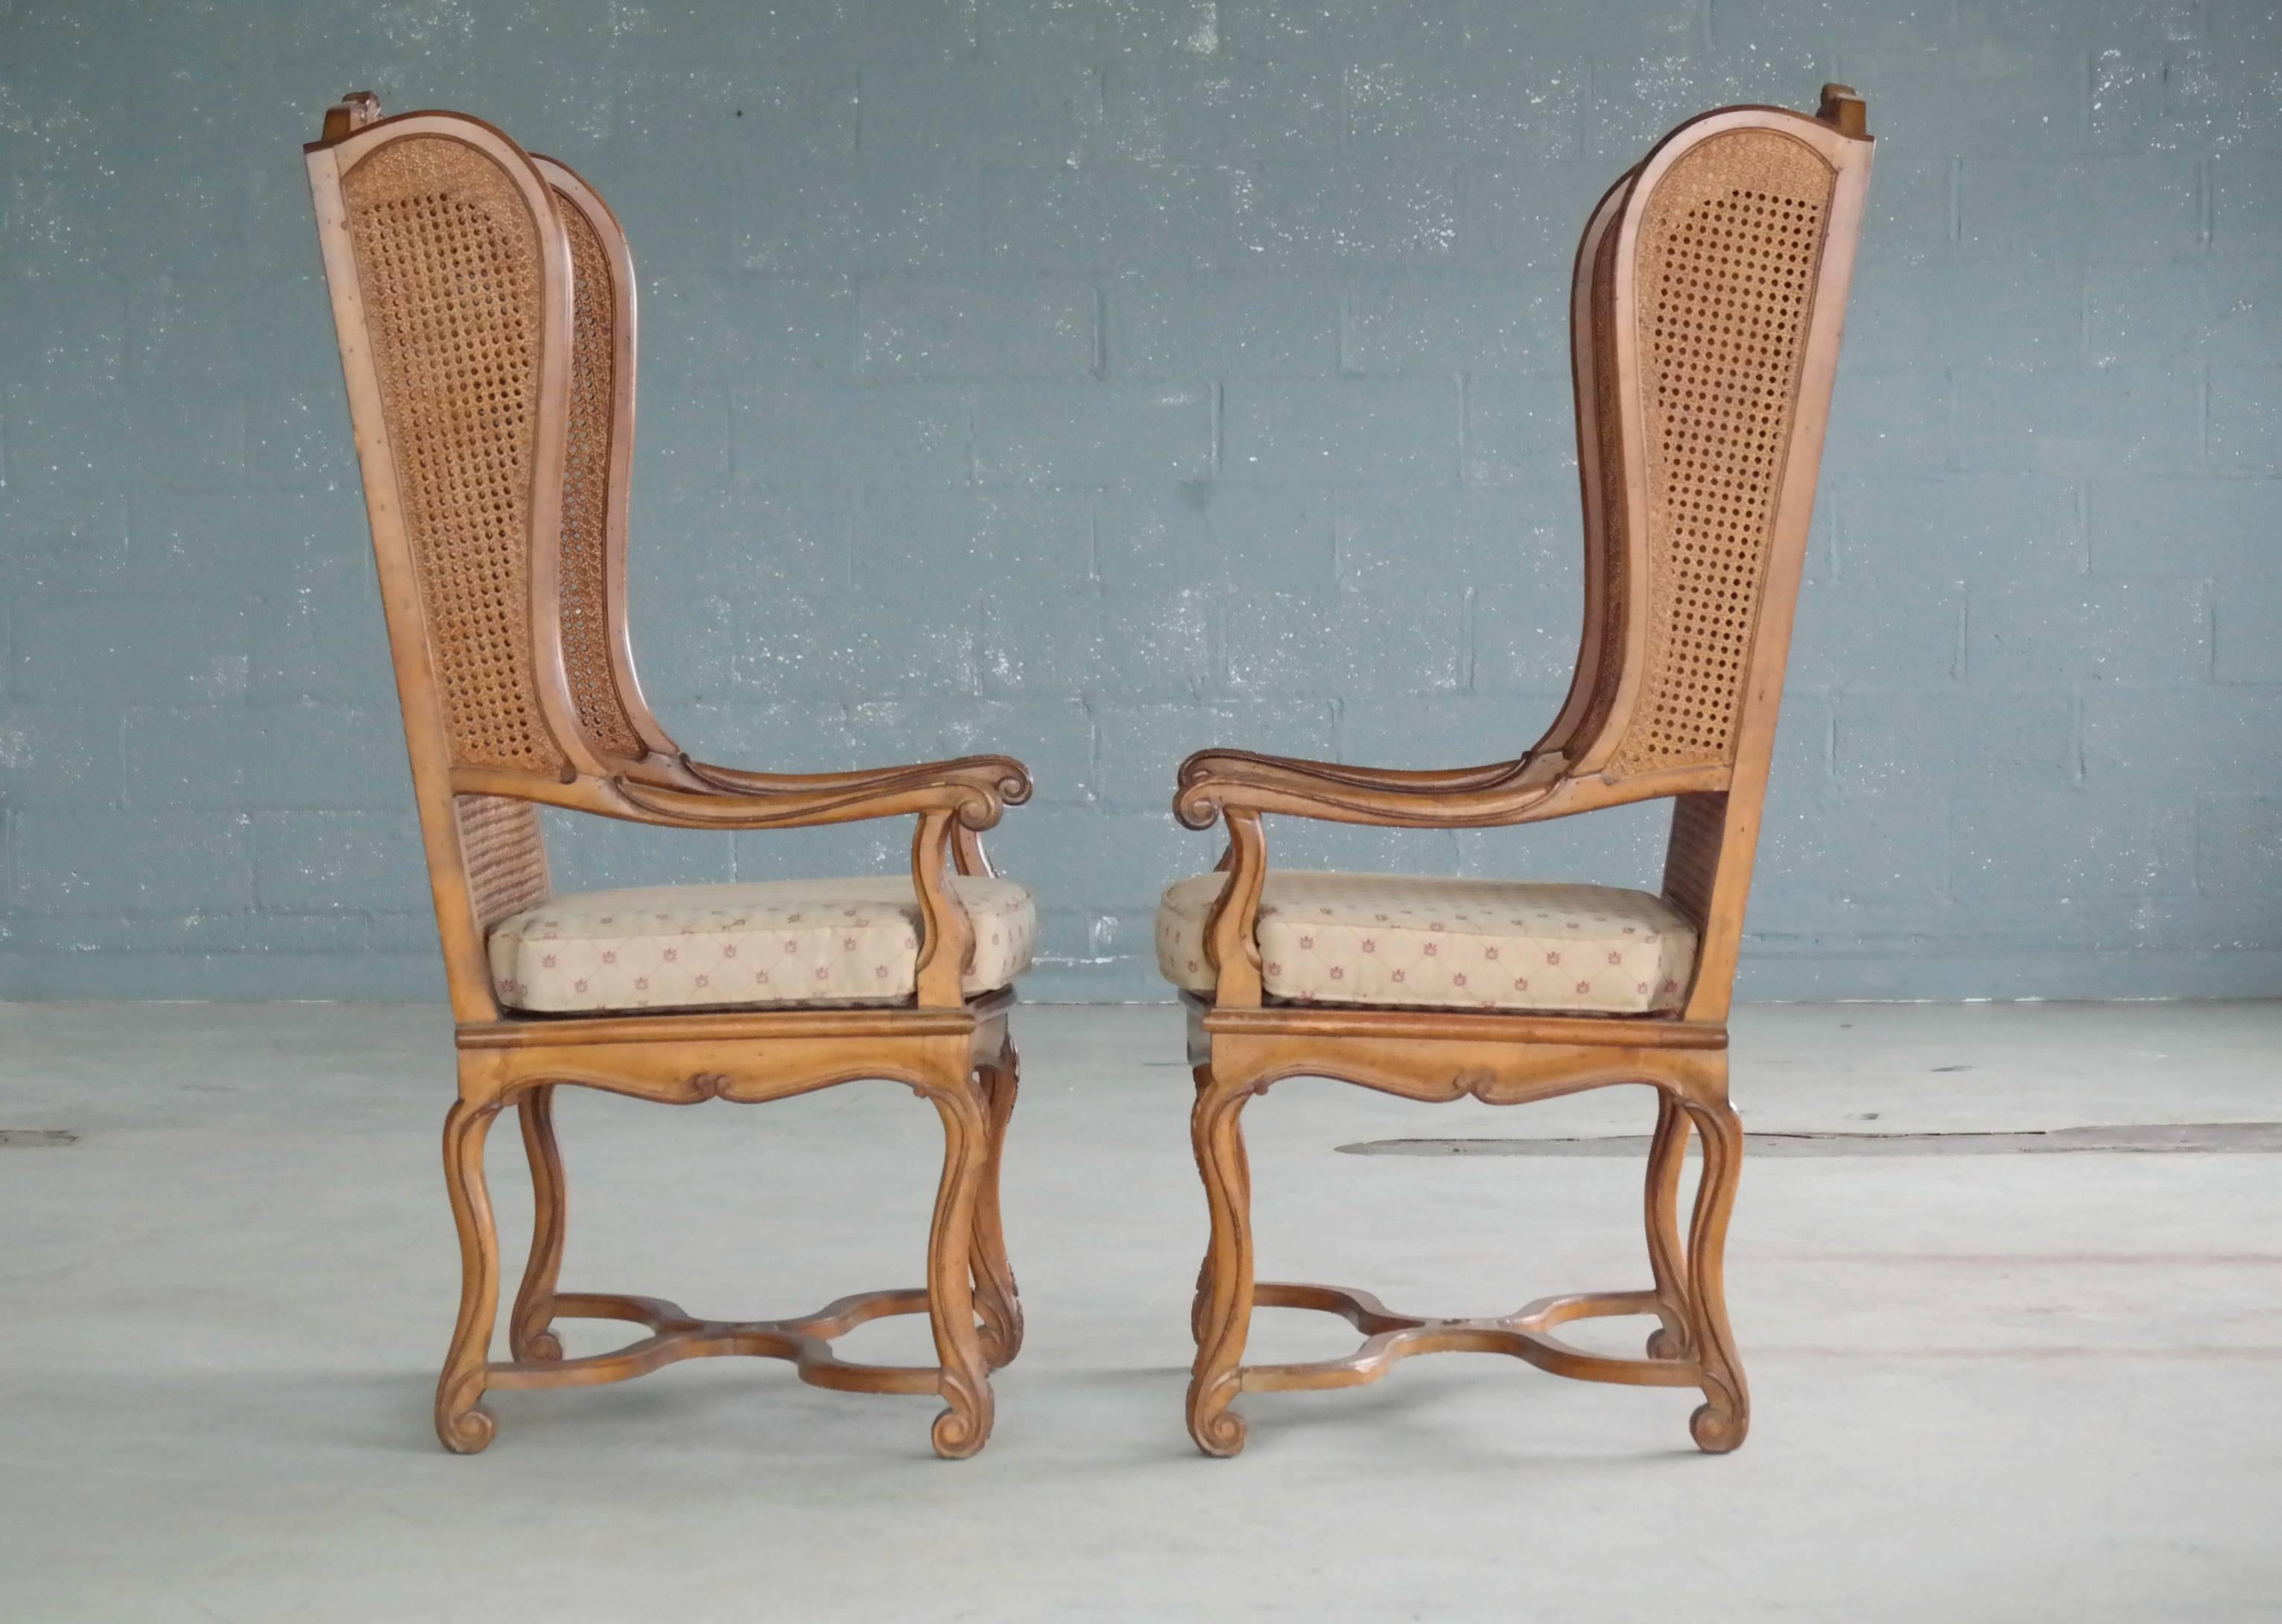 American Pair of 1920s Hollywood Regency Cane Wingback Chairs